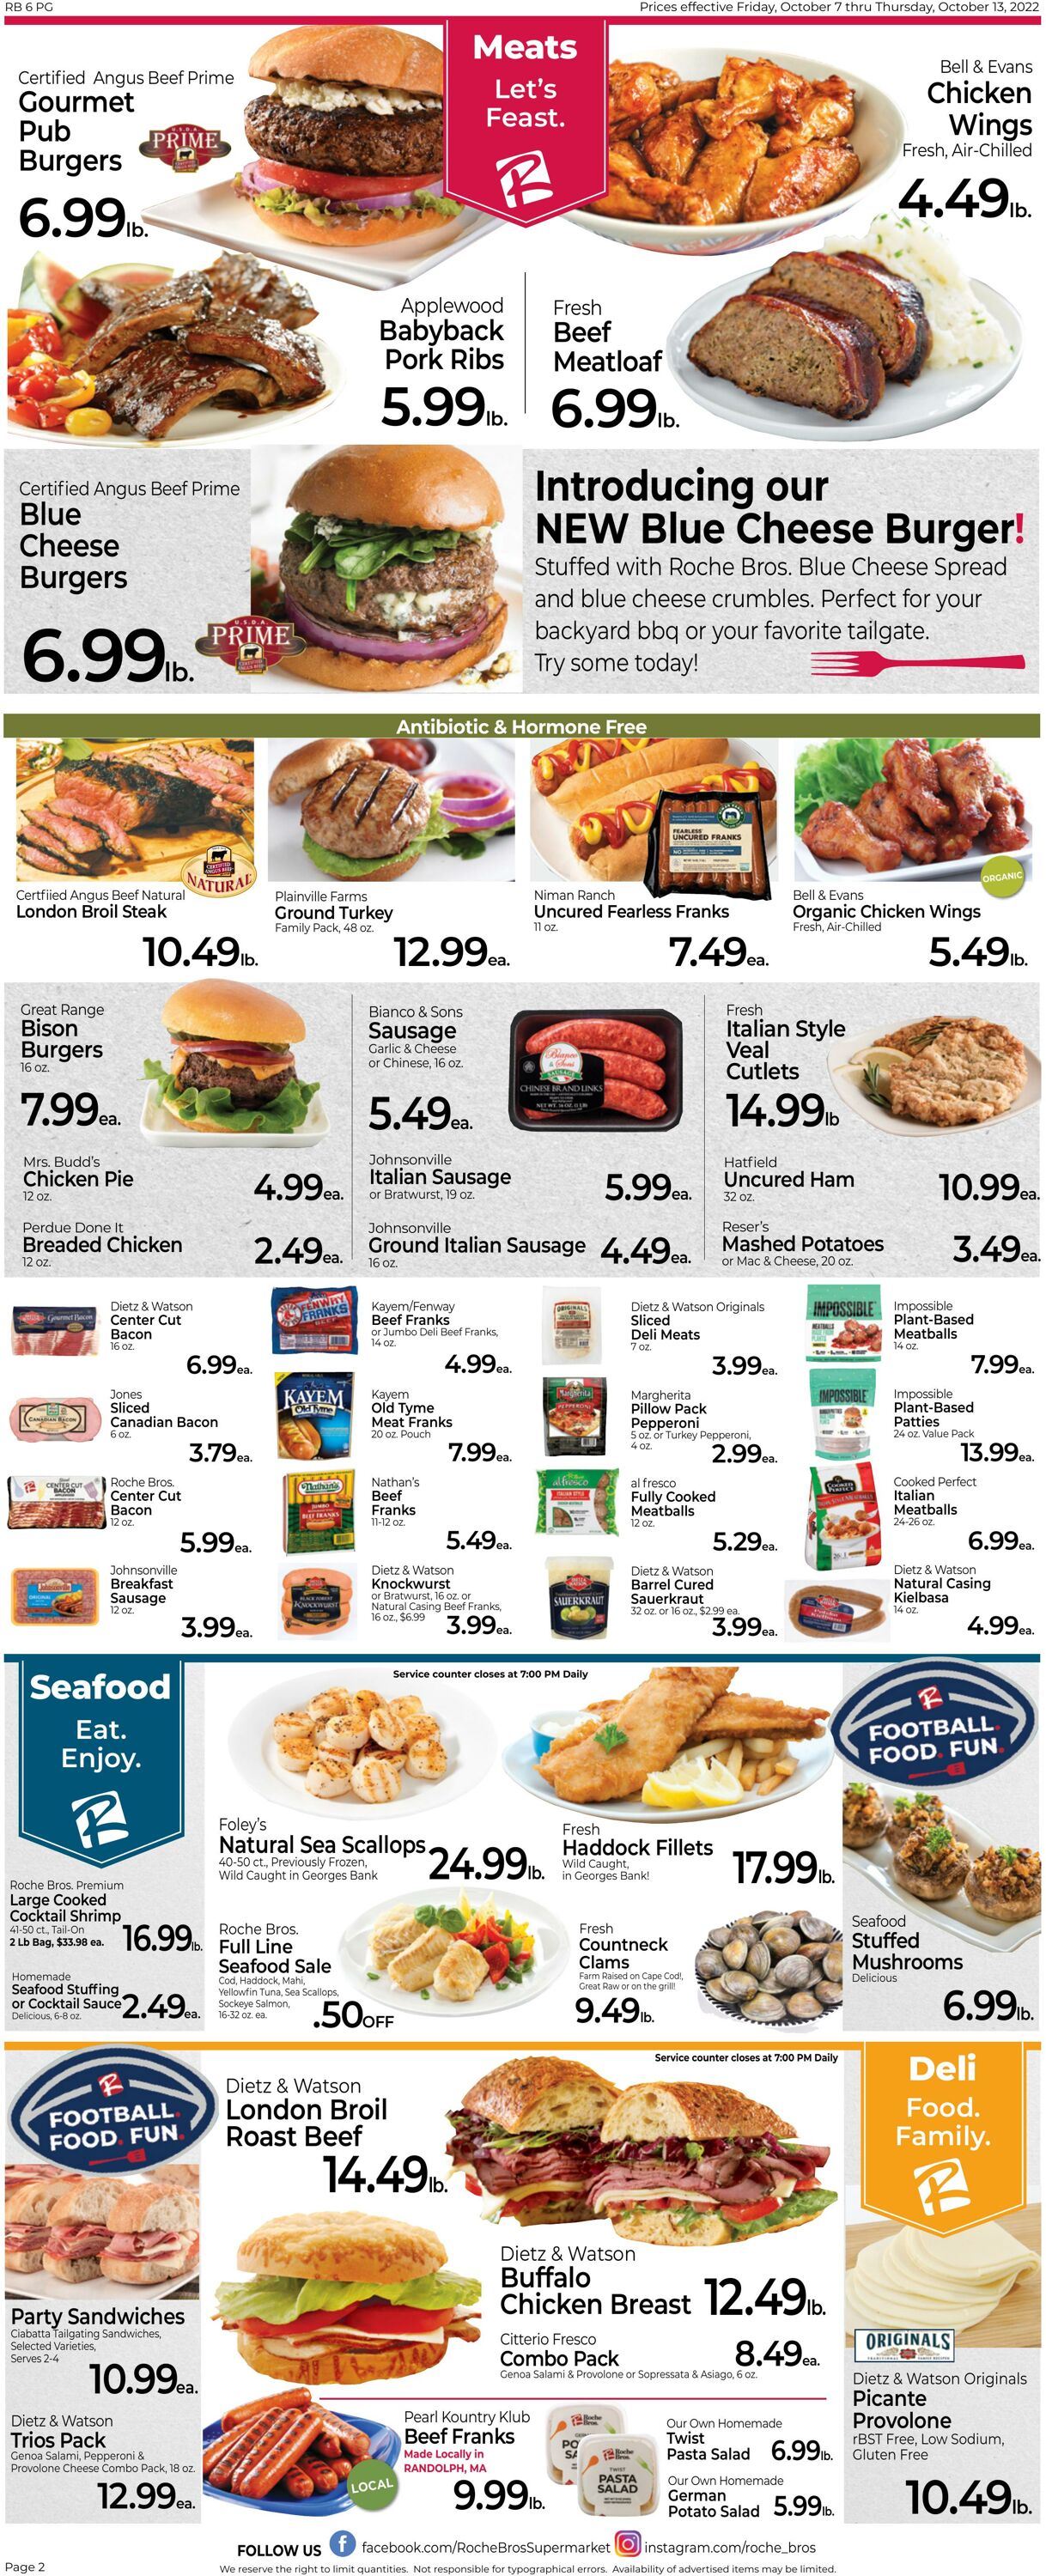 Weekly ad Roche Bros 10/07/2022 - 10/13/2022